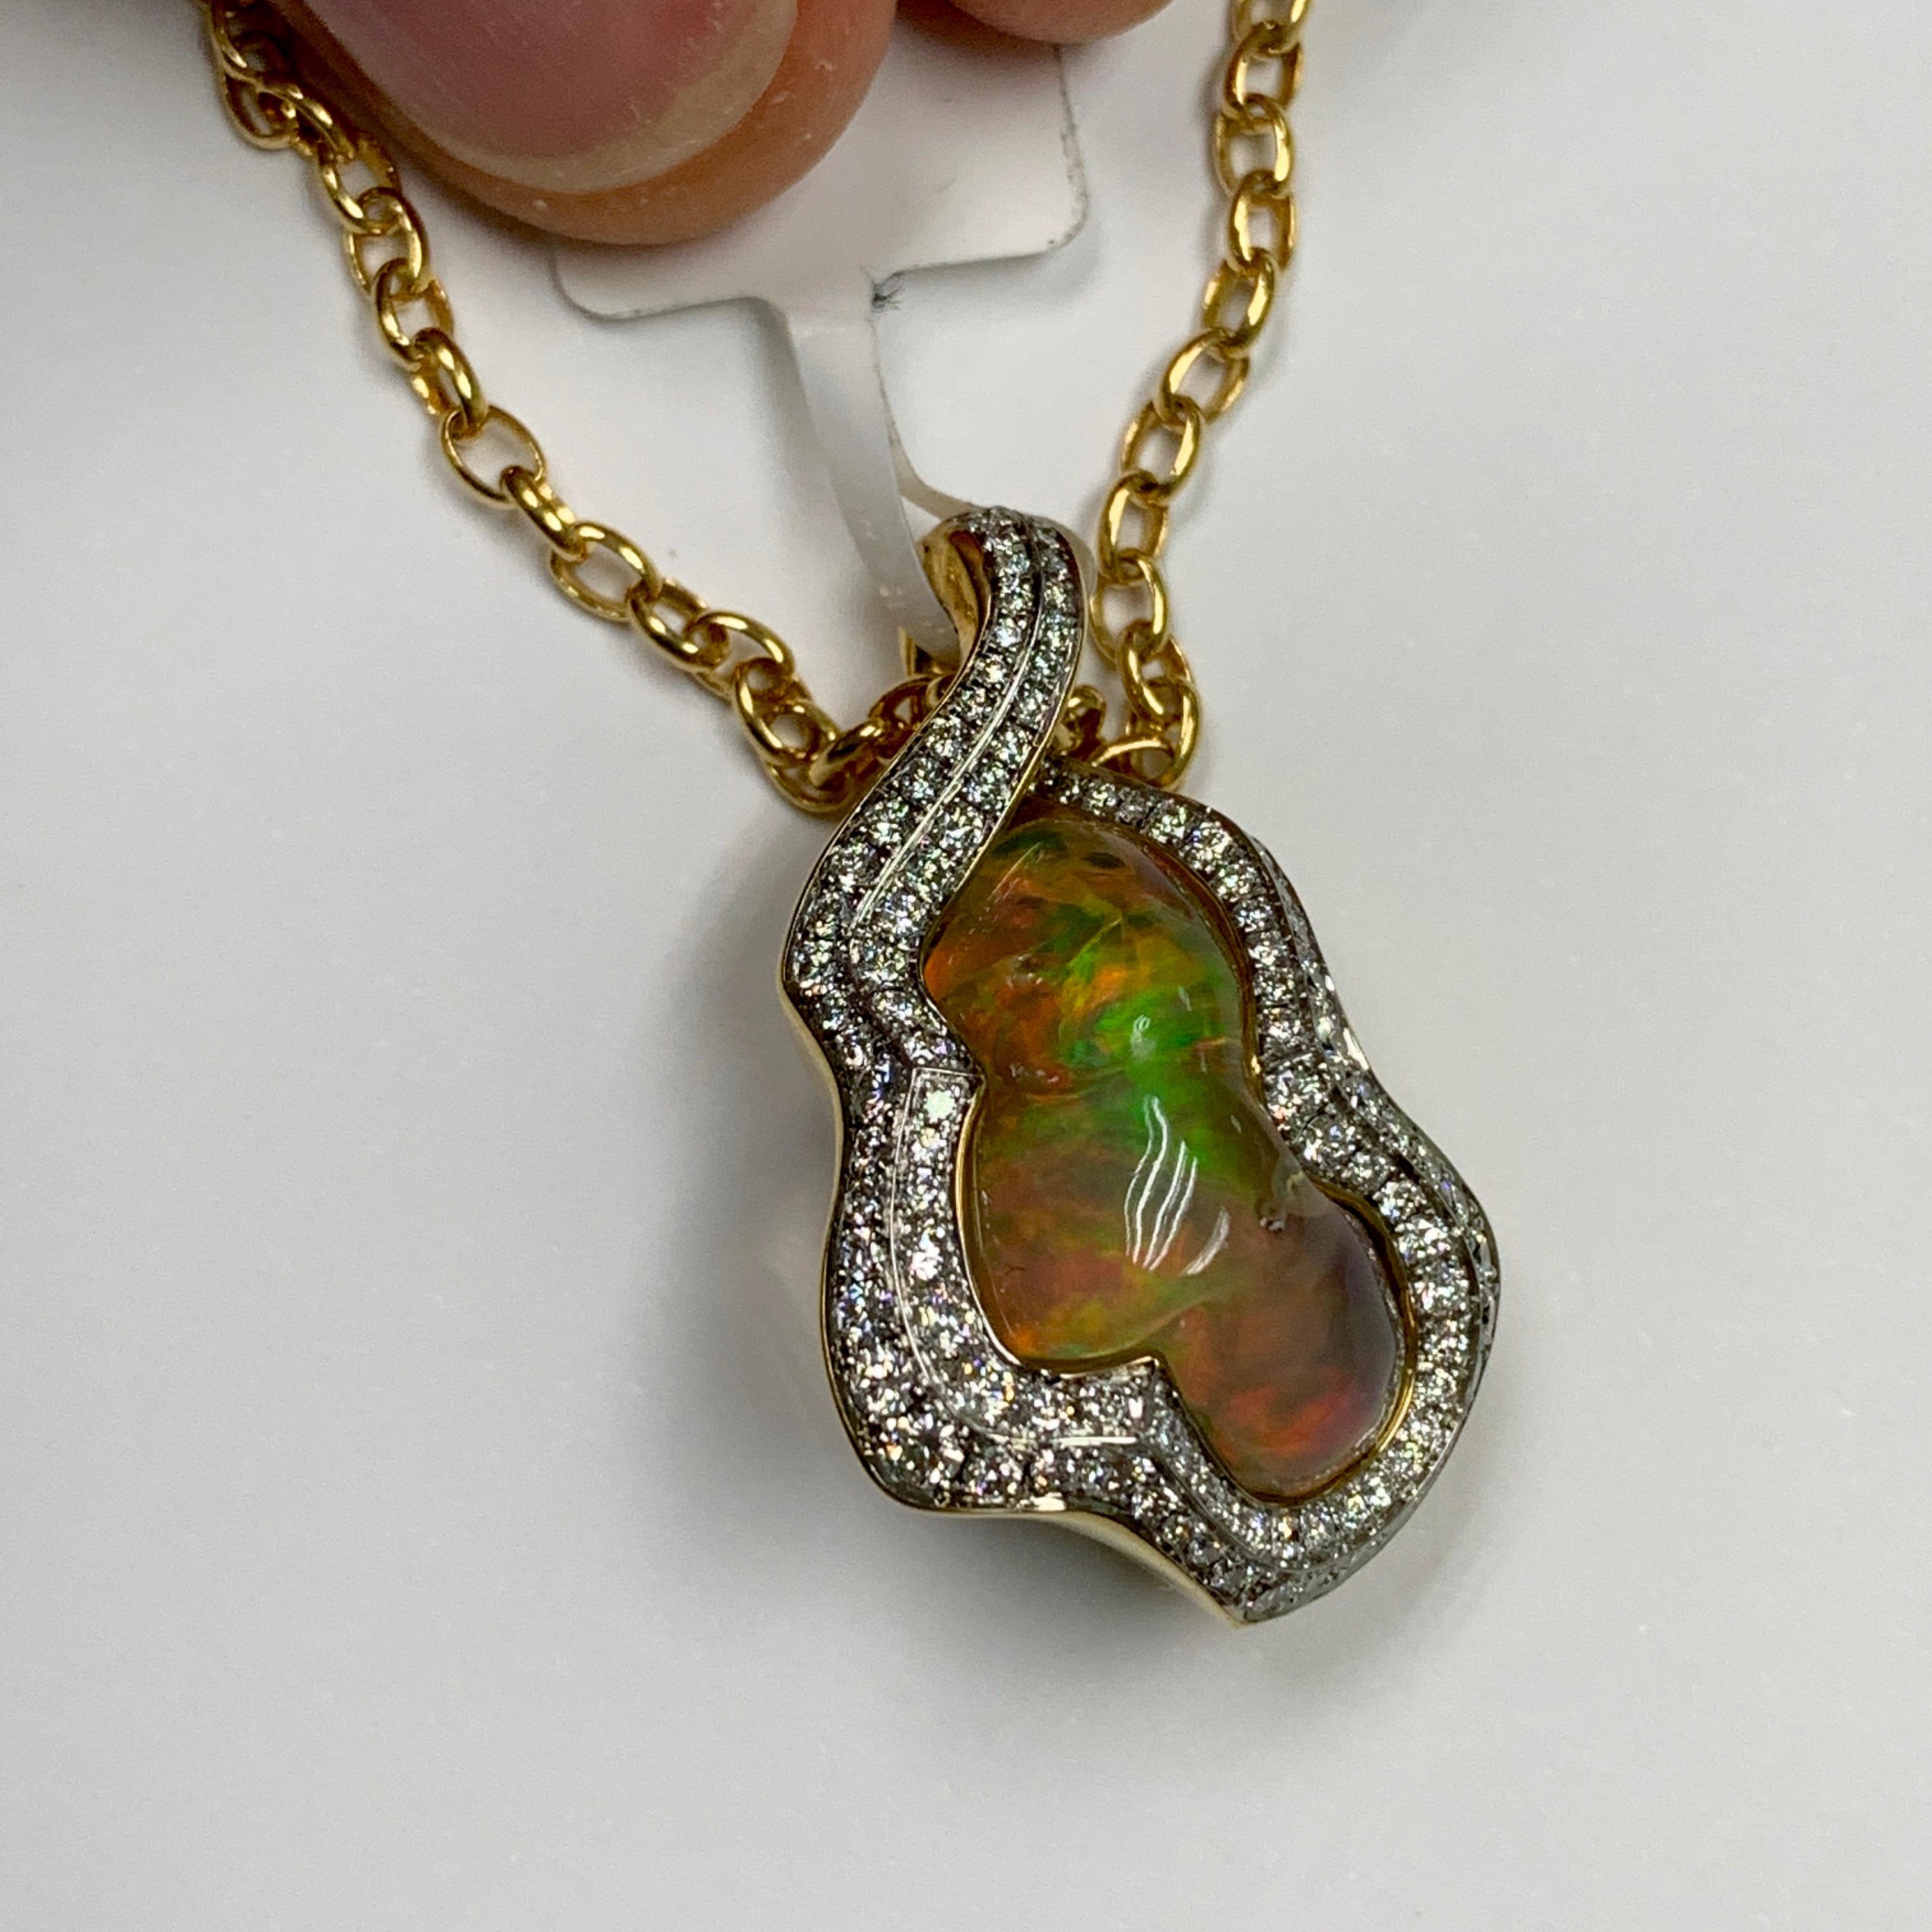 Mexican Opal 13.48 Carat Diamonds One of a Kind 18 Karat Yellow Gold Pendant
Opals, unlike many other stones, are almost impossible to cut, they are always unique. Therefore, jewelry with Opals is always improvisation. It also happened with this